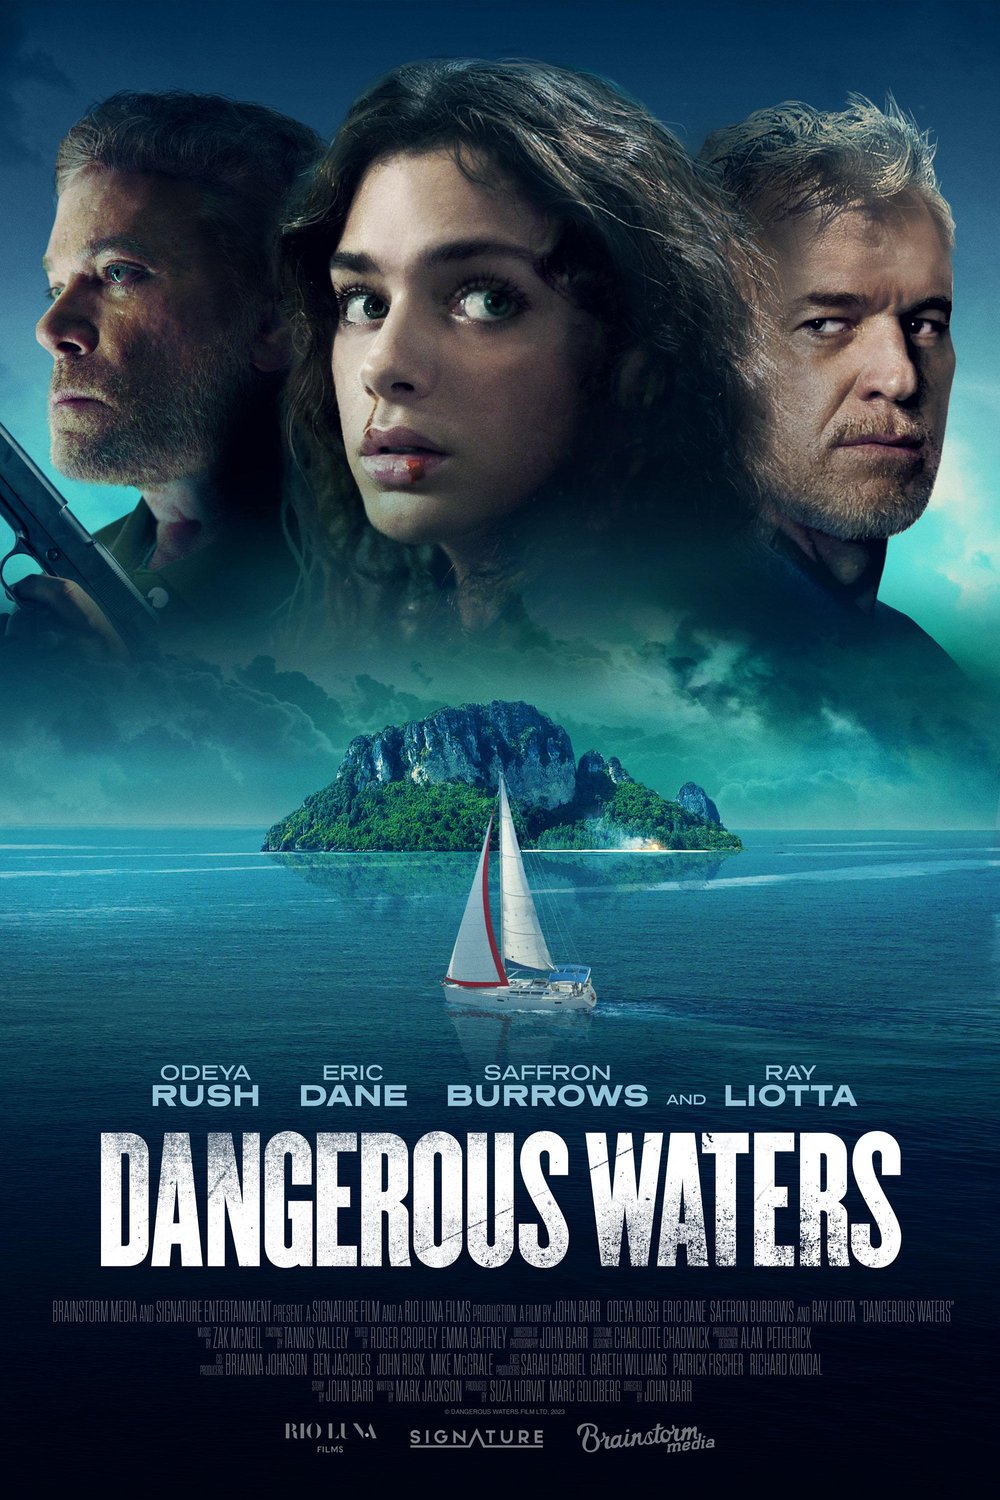 Poster of the movie Dangerous Waters